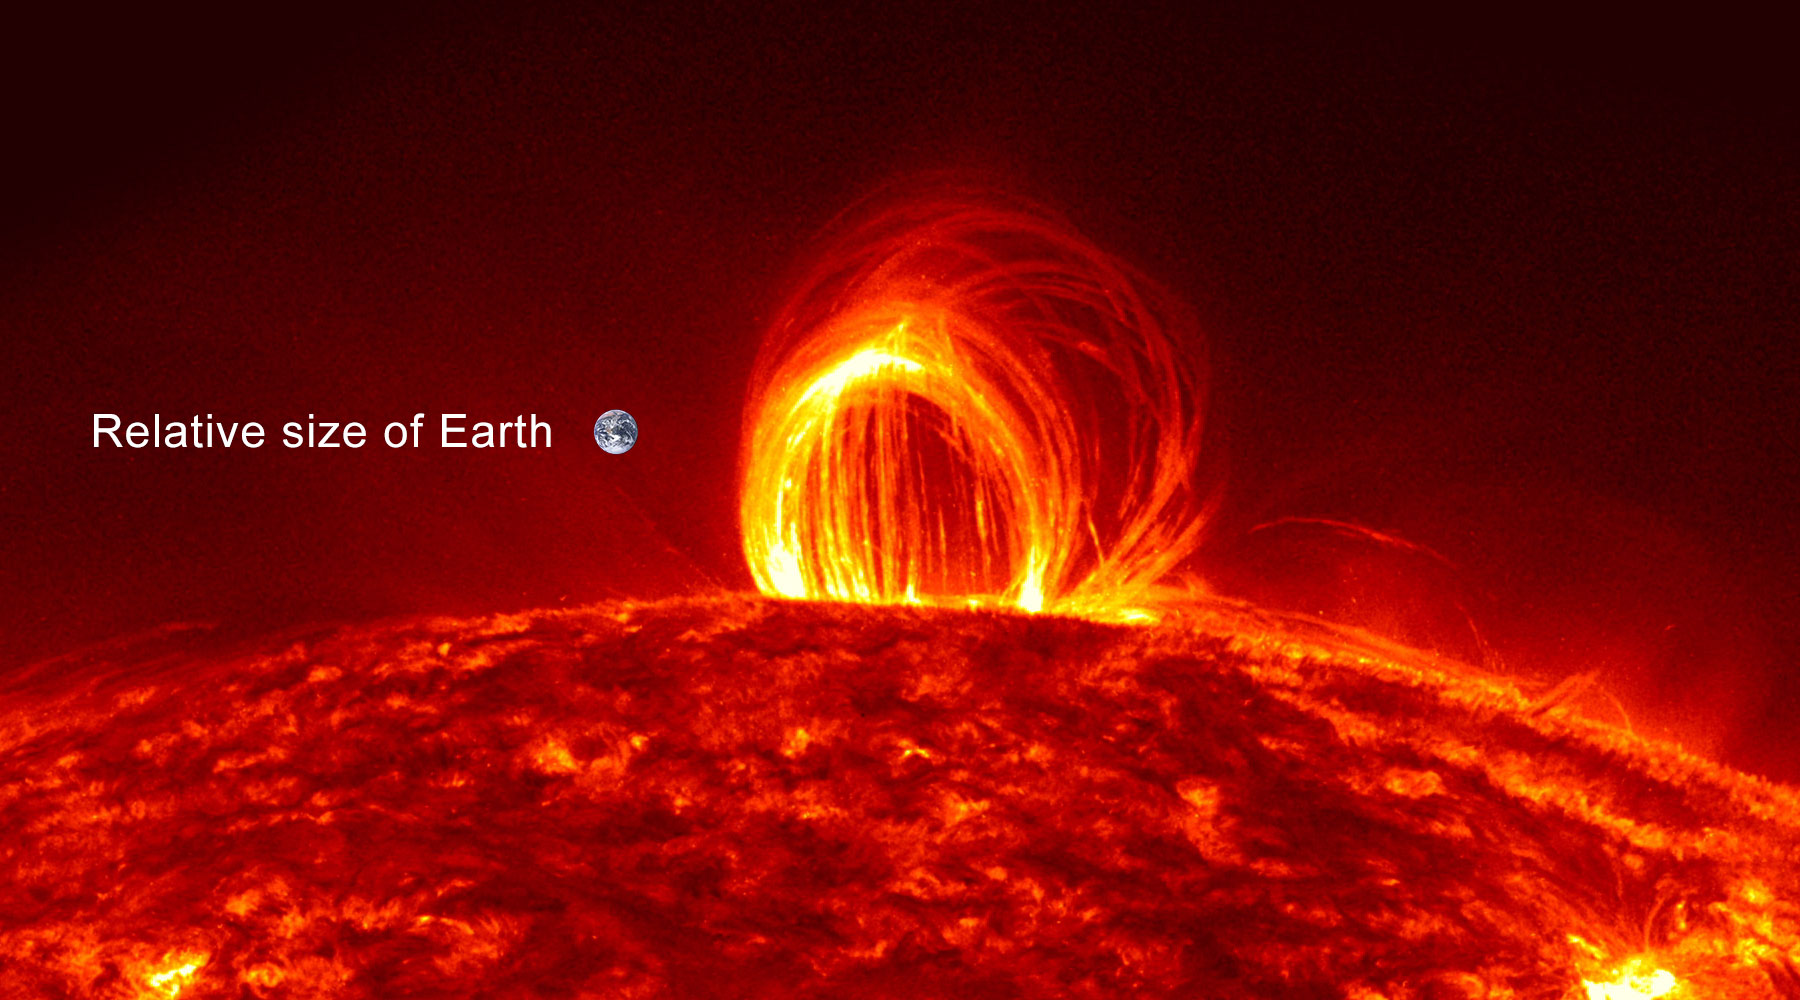 Close up image of the sun showing an eruption of plasma. An image of the Earth is shown for scale. The height of the eruption is about 8 times higher than Earth's diamater.